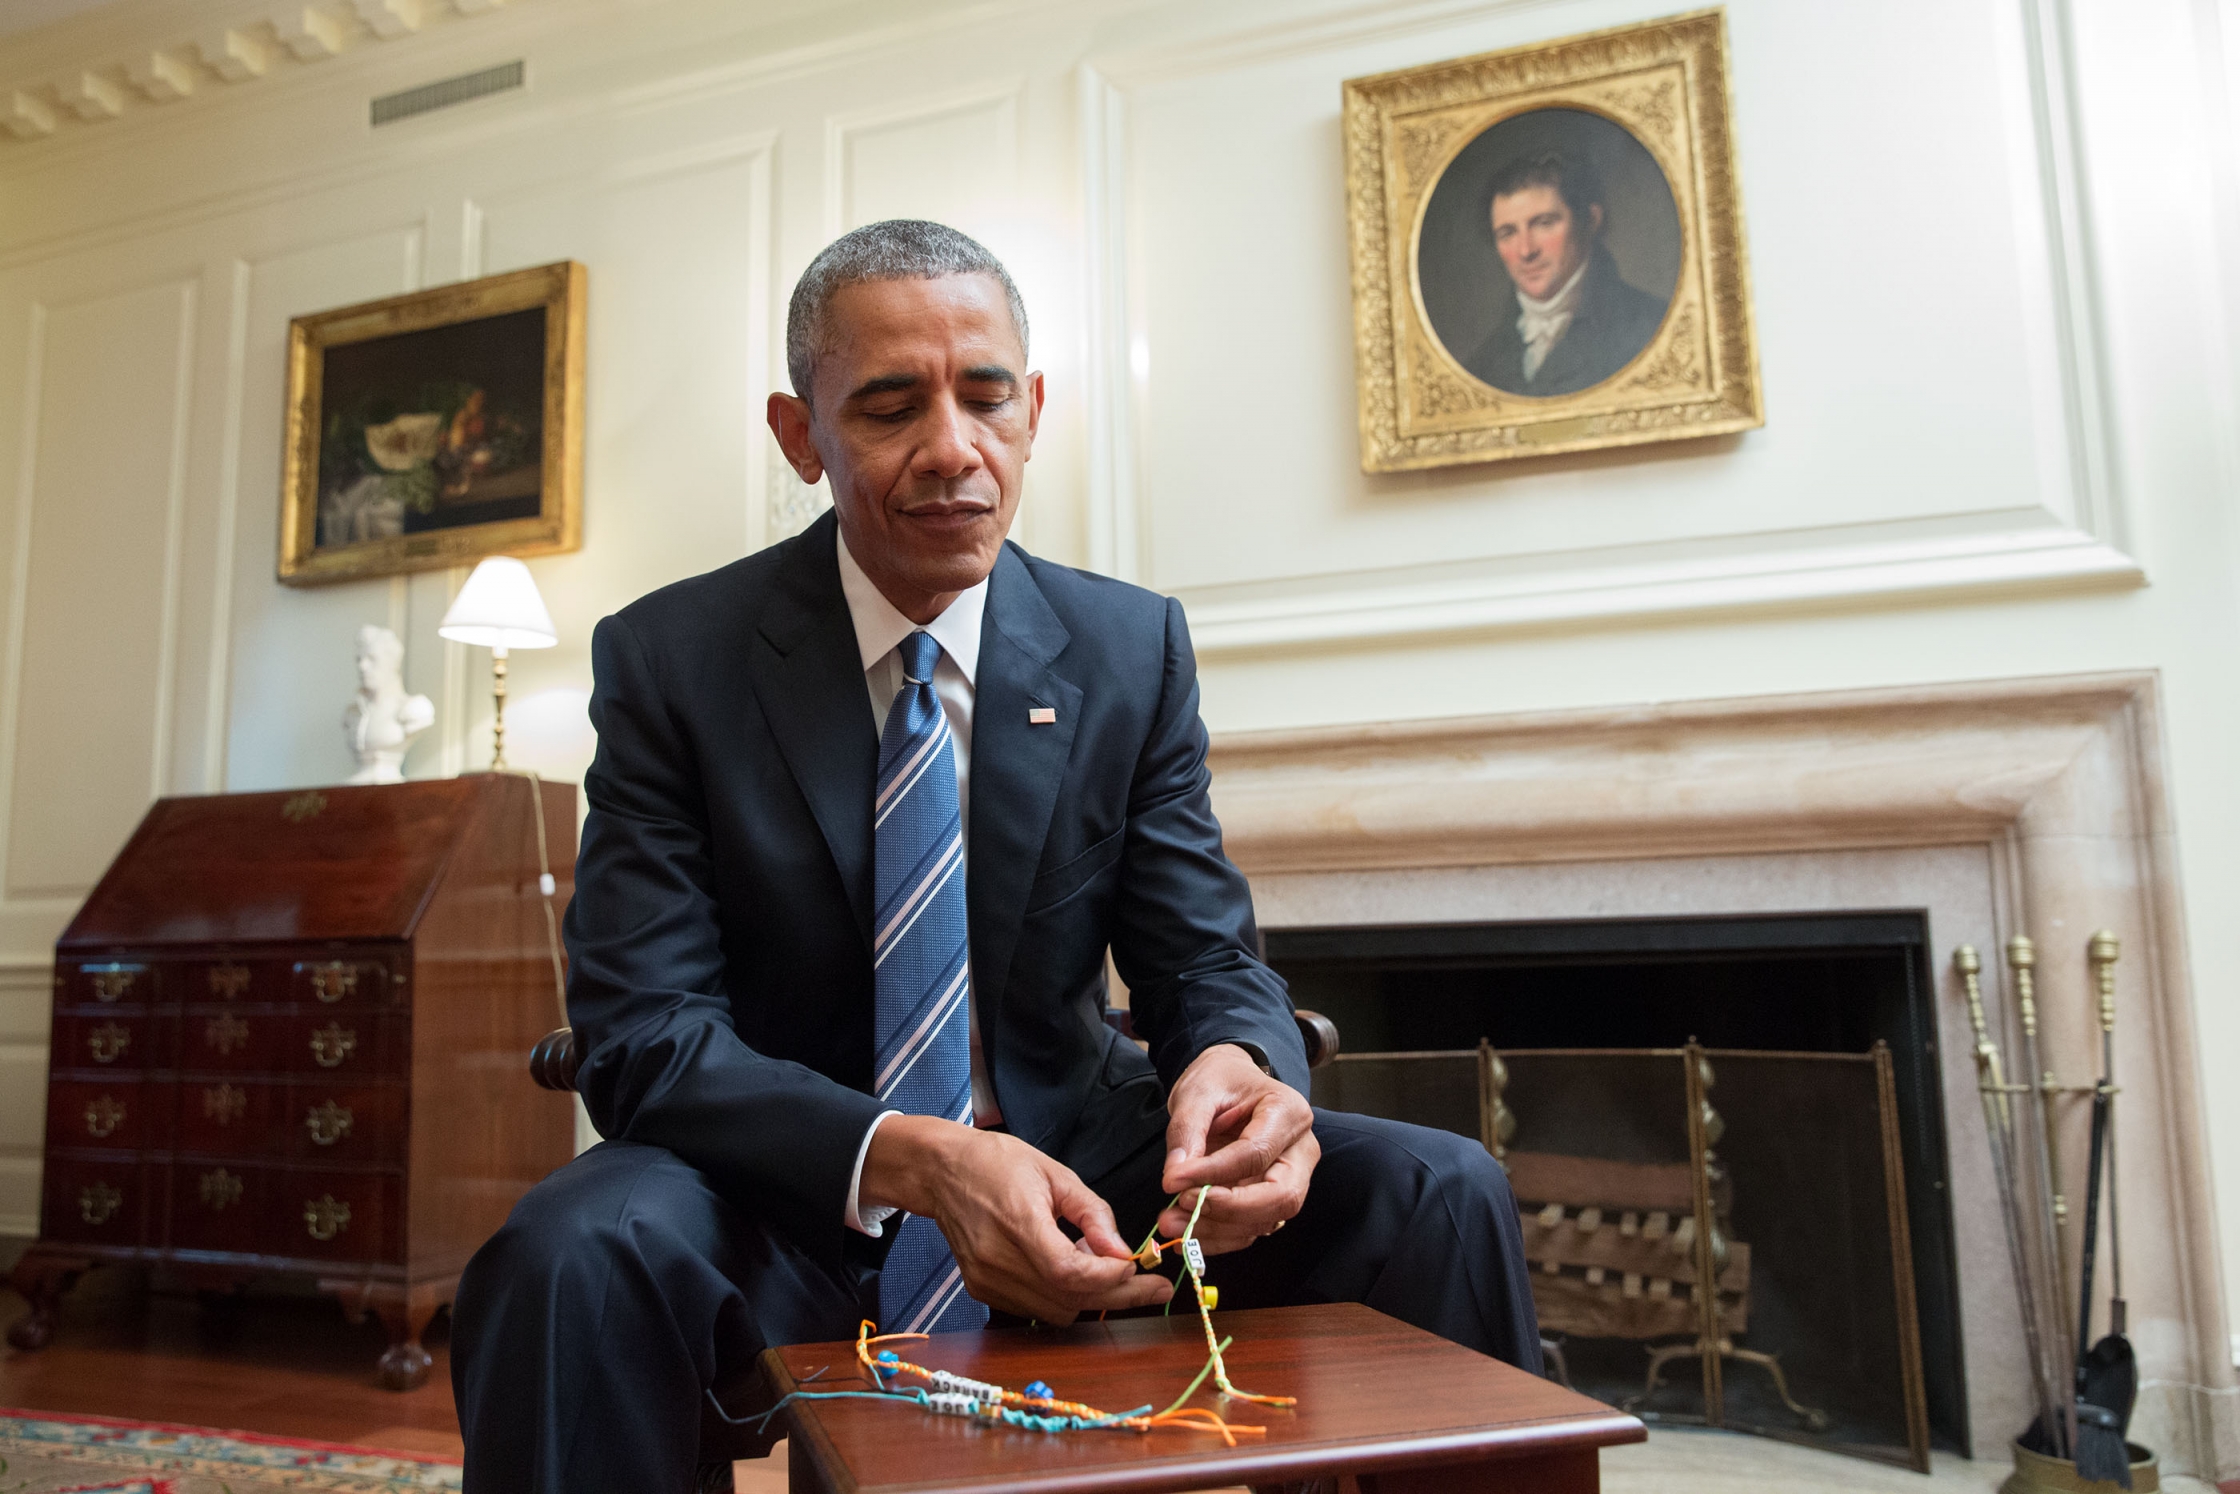 President Barack Obama makes a friendship bracelet while taping a video for Buzzfeed’s TurnUptoVote Week, in the Map Room of the White House, June 23, 2016. (Official White House Photo by Amanda Lucidon)